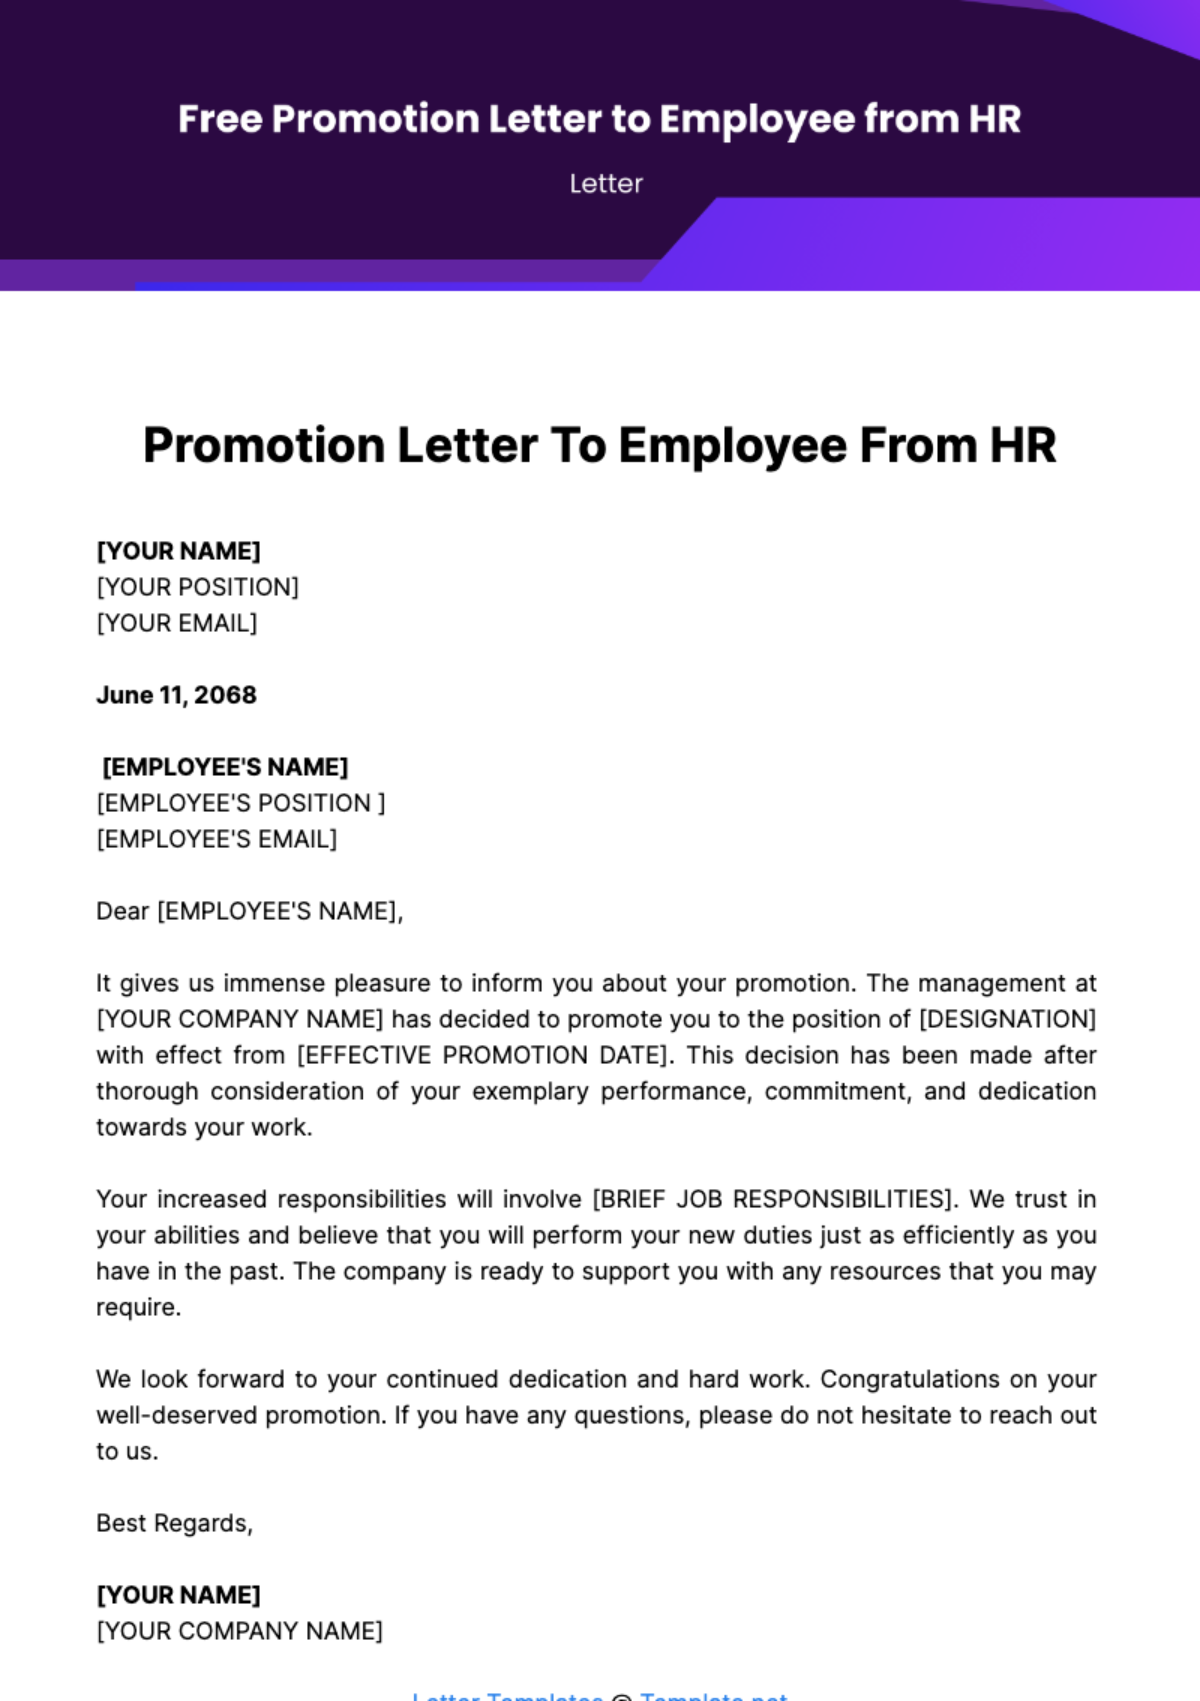 Free Promotion Letter to Employee from HR Template